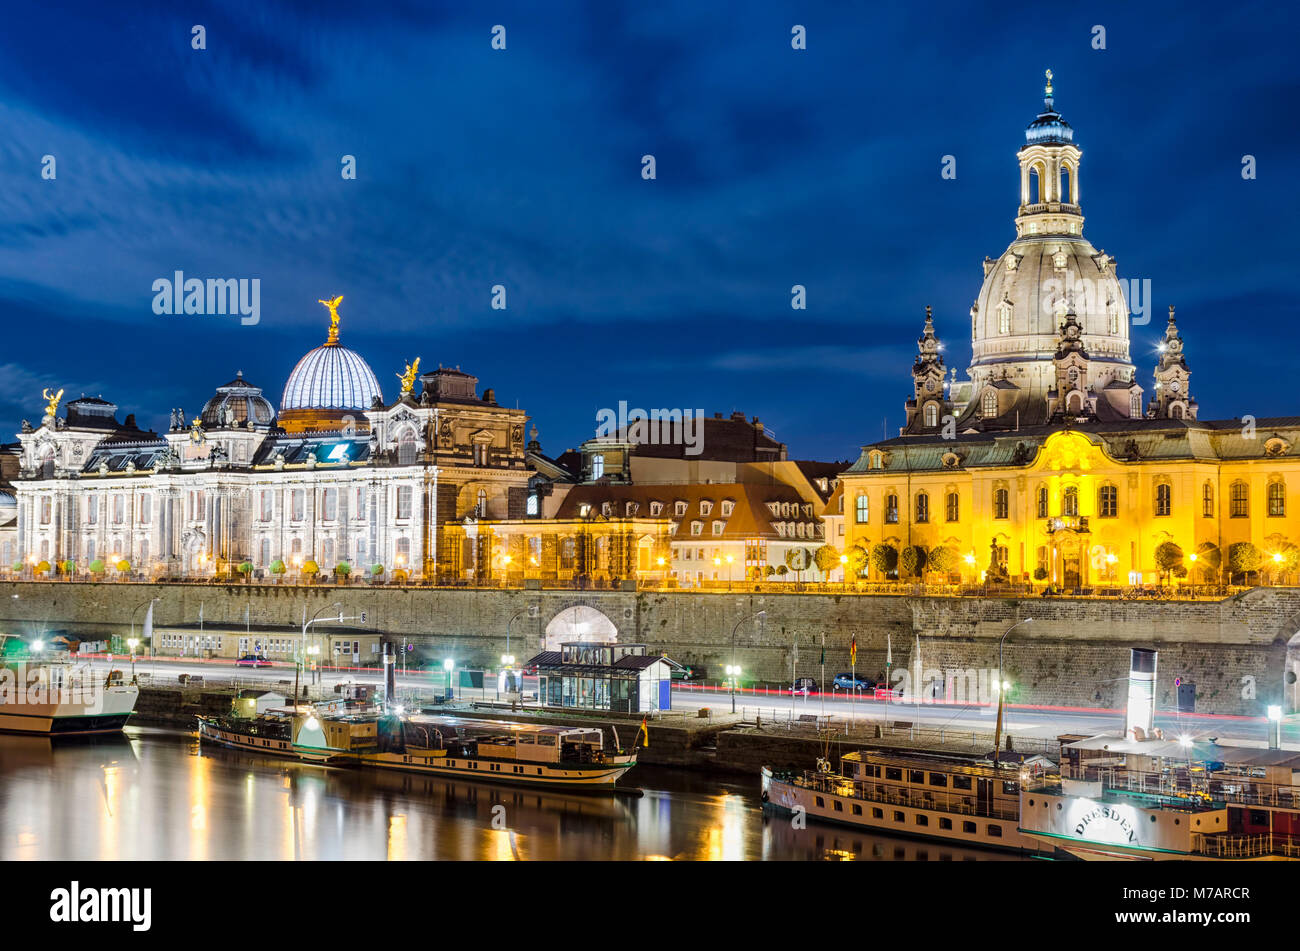 Frauenkirche and the Elbe river at night in Dresden, Germany Stock Photo